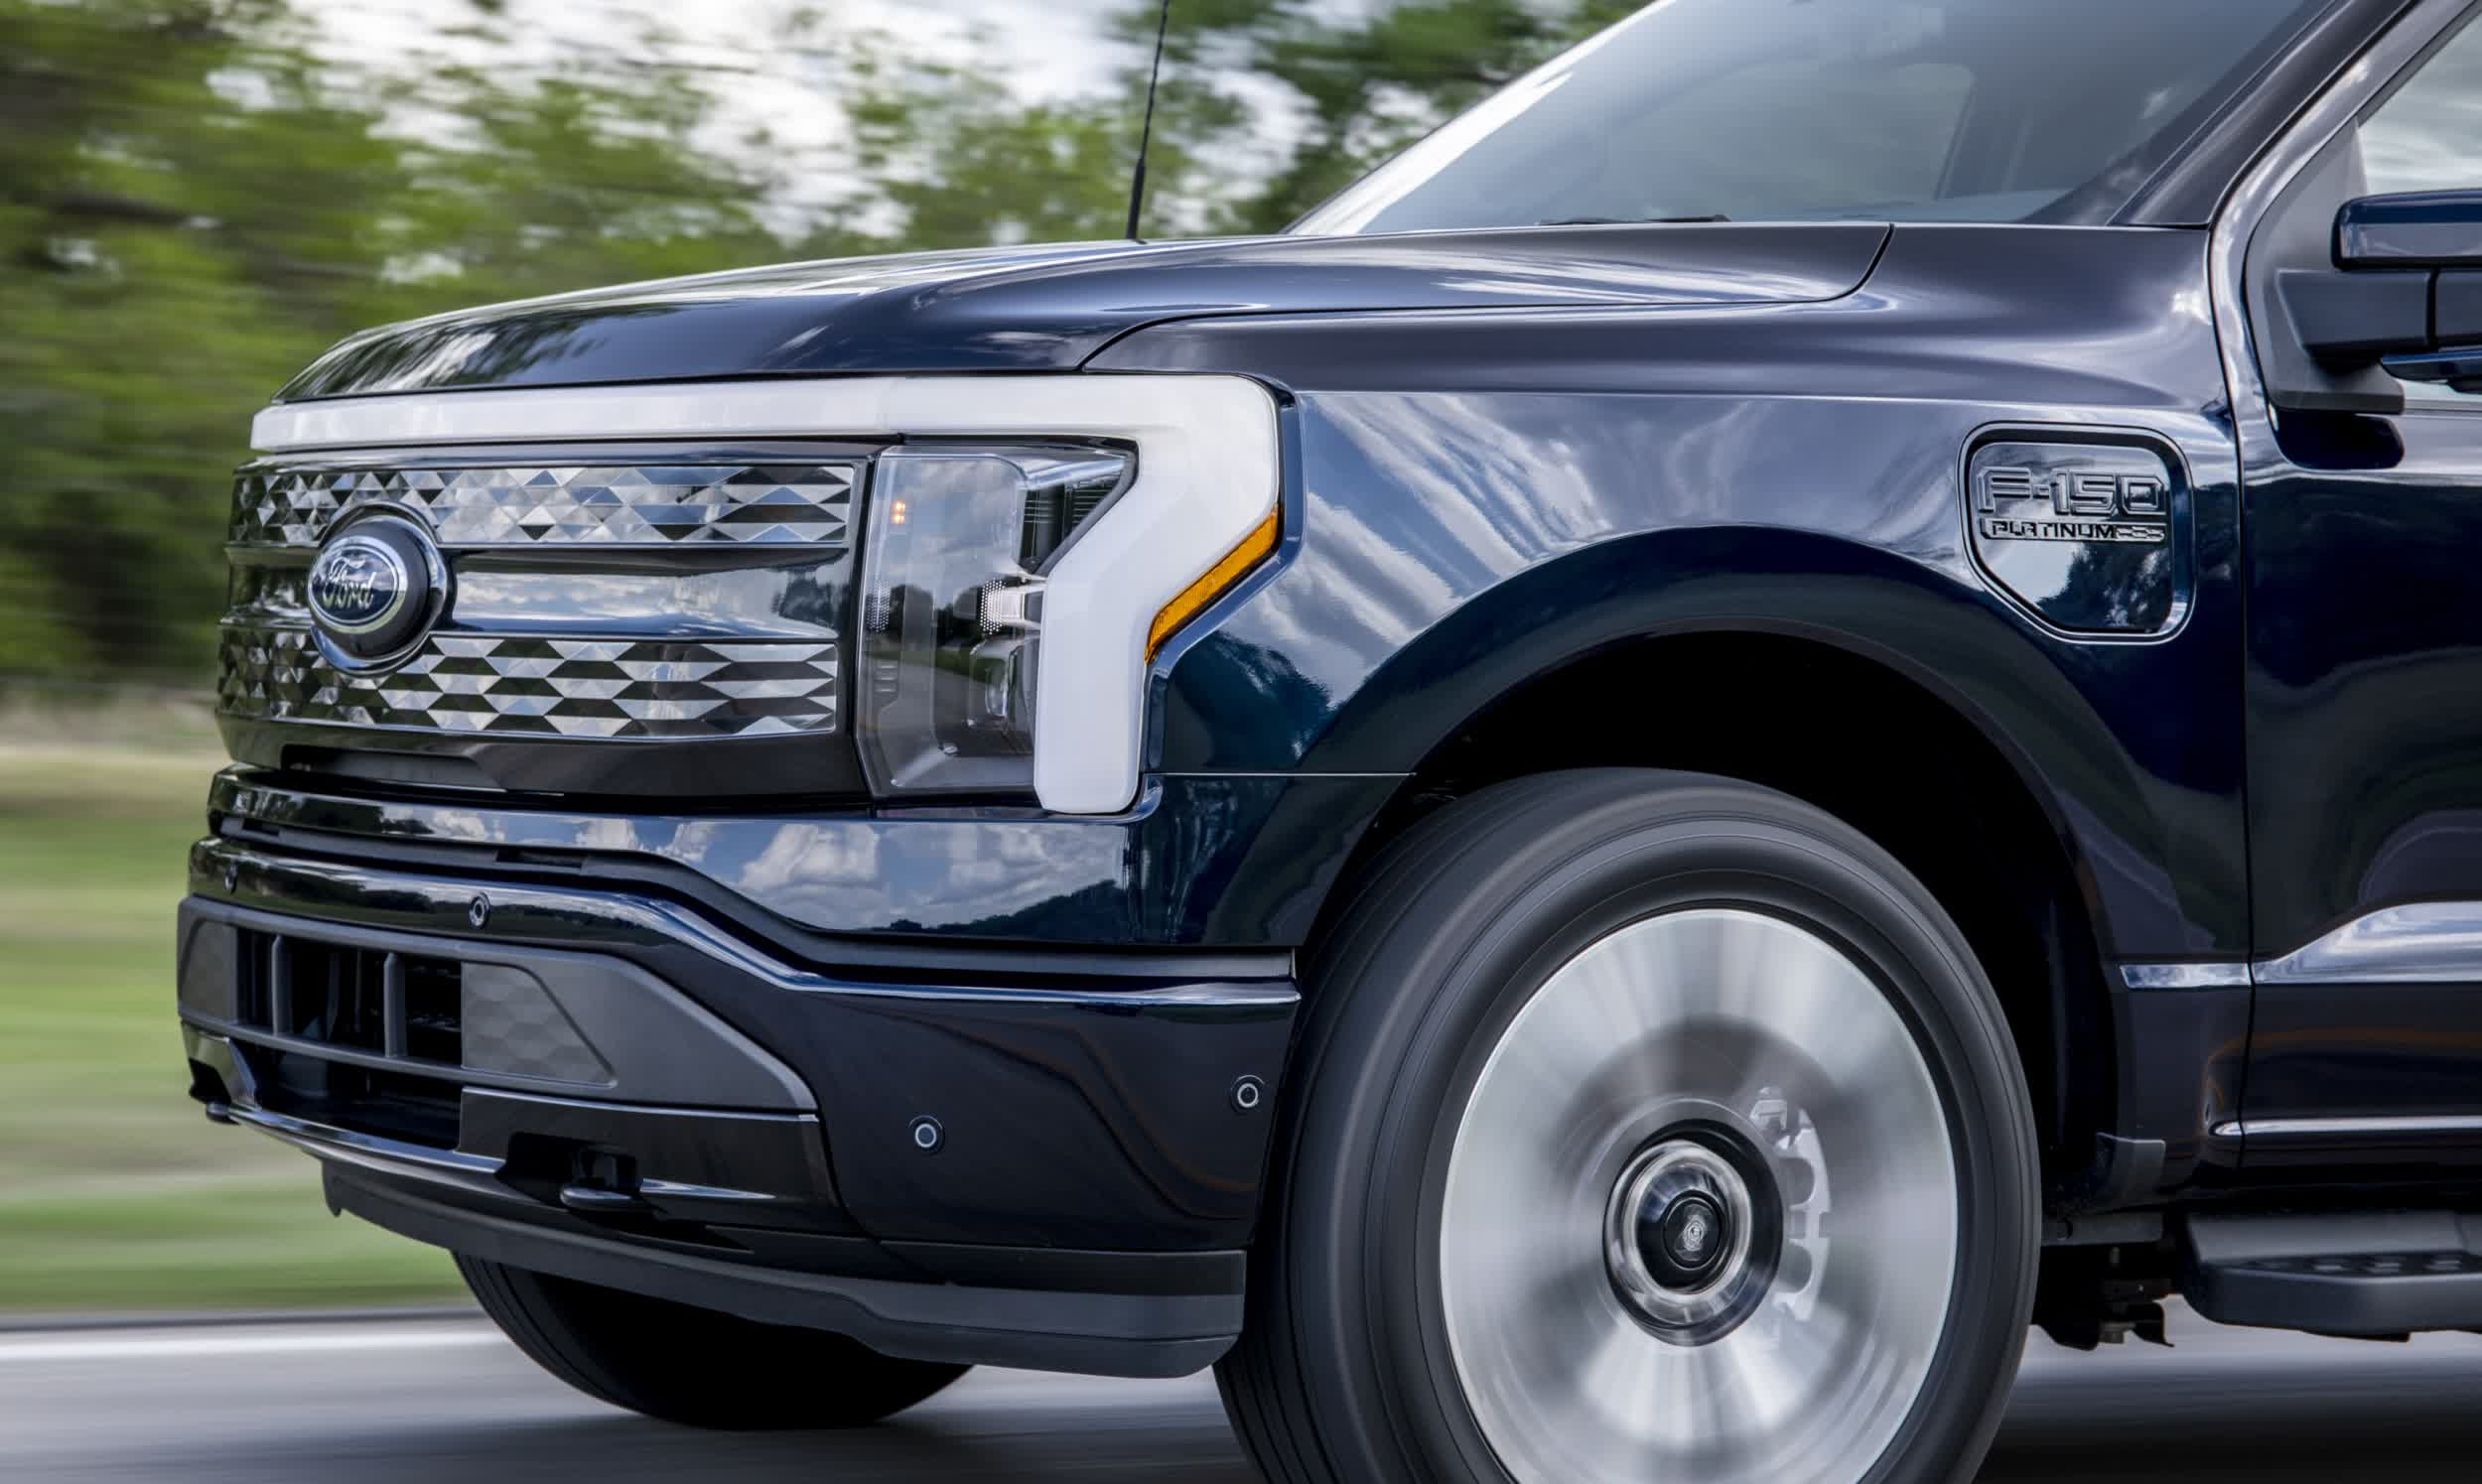 Ford pauses production and shipments of F-150 Lightning over potential battery issue